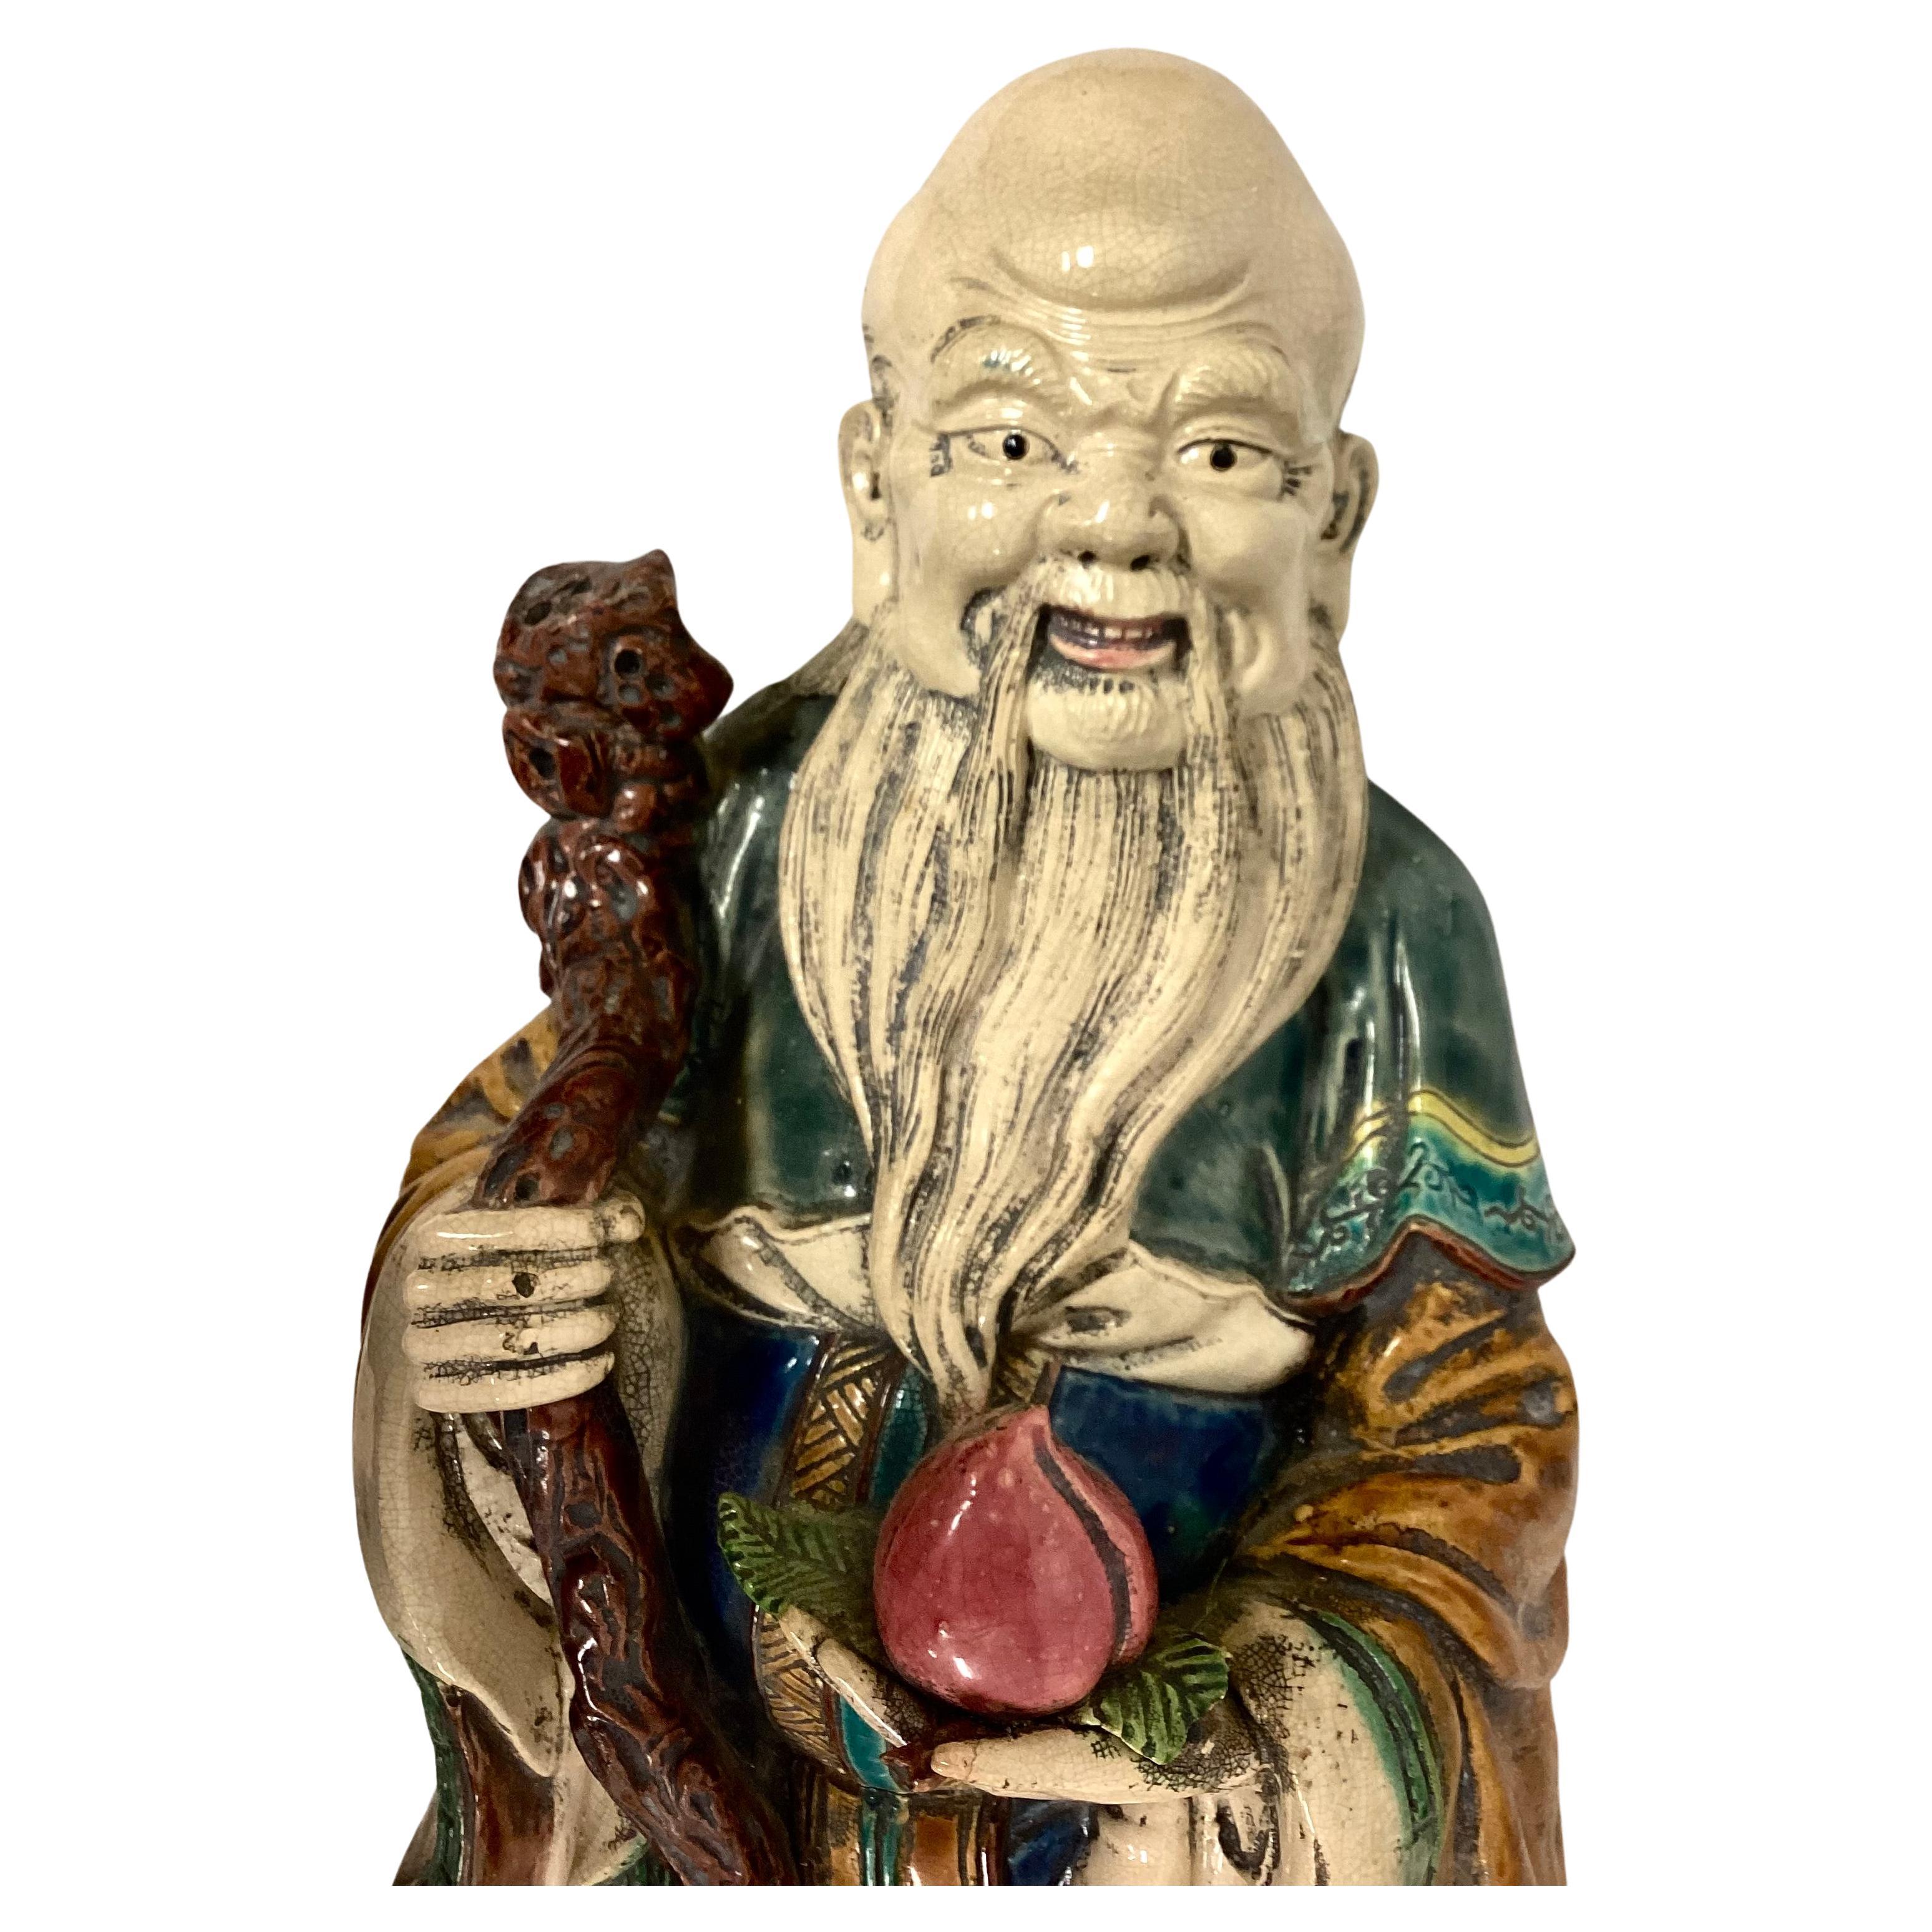 Large 19th century Chinese sage made of heavy Porcelain. Man draped in traditional robe holding a large walking stick in one hand and a lotus flower in the other. Features superb colors including pink, blue, green, brown and tan. No chips or cracks.